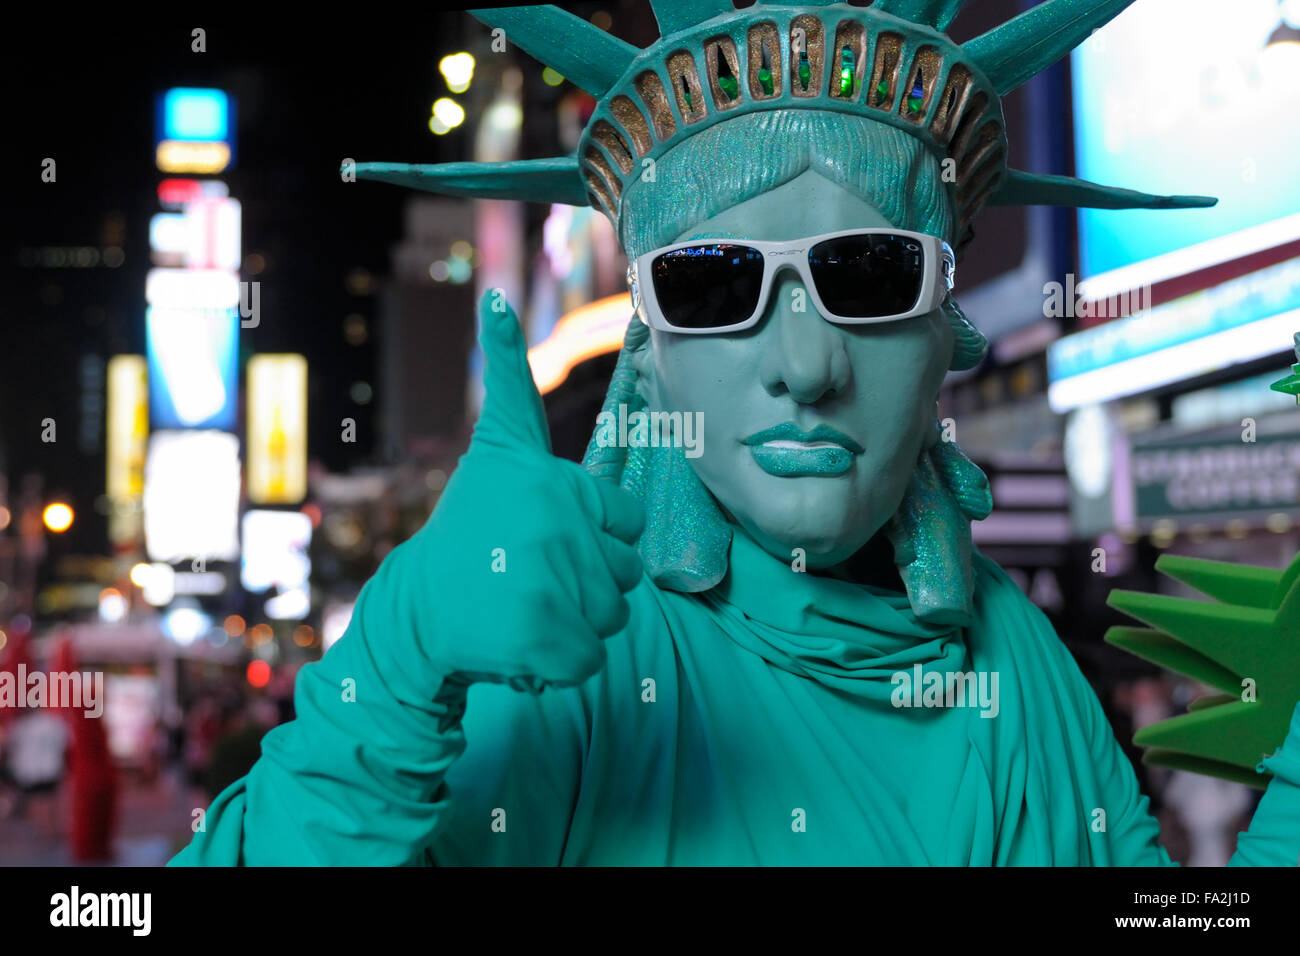 The Statue of Liberty, Times Square, New York, New York. Stock Photo